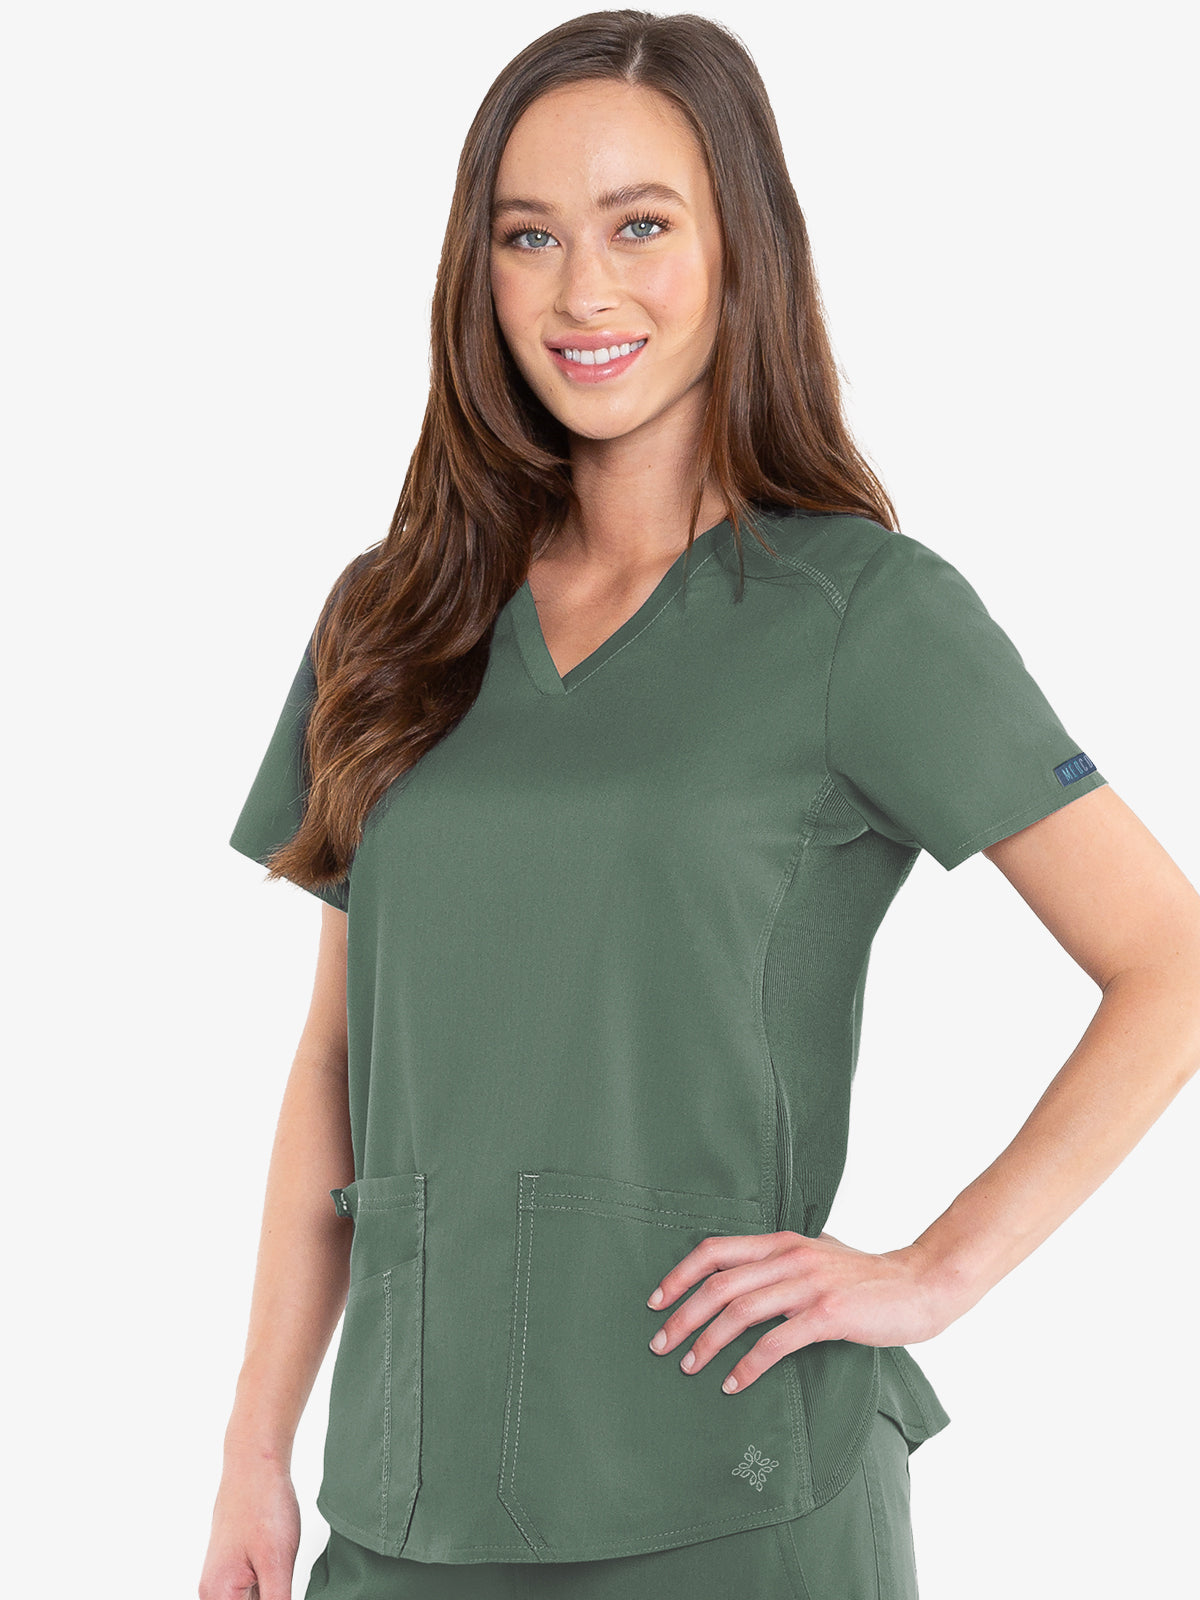 Med Couture Touch 7459 Women's V-Neck Shirttail Top Olive